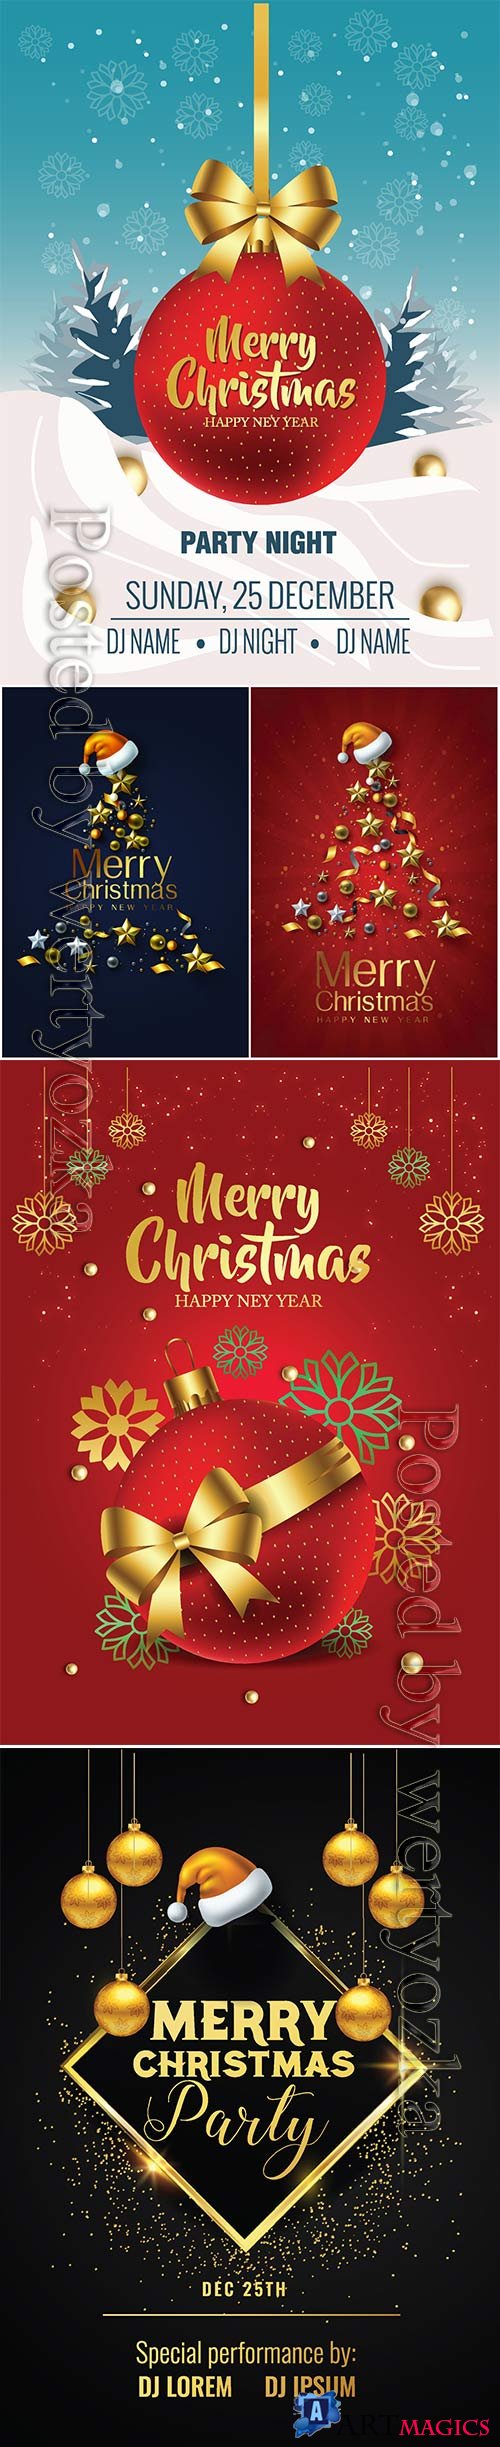 2020 Merry Chistmas and Happy New Year vector illustration